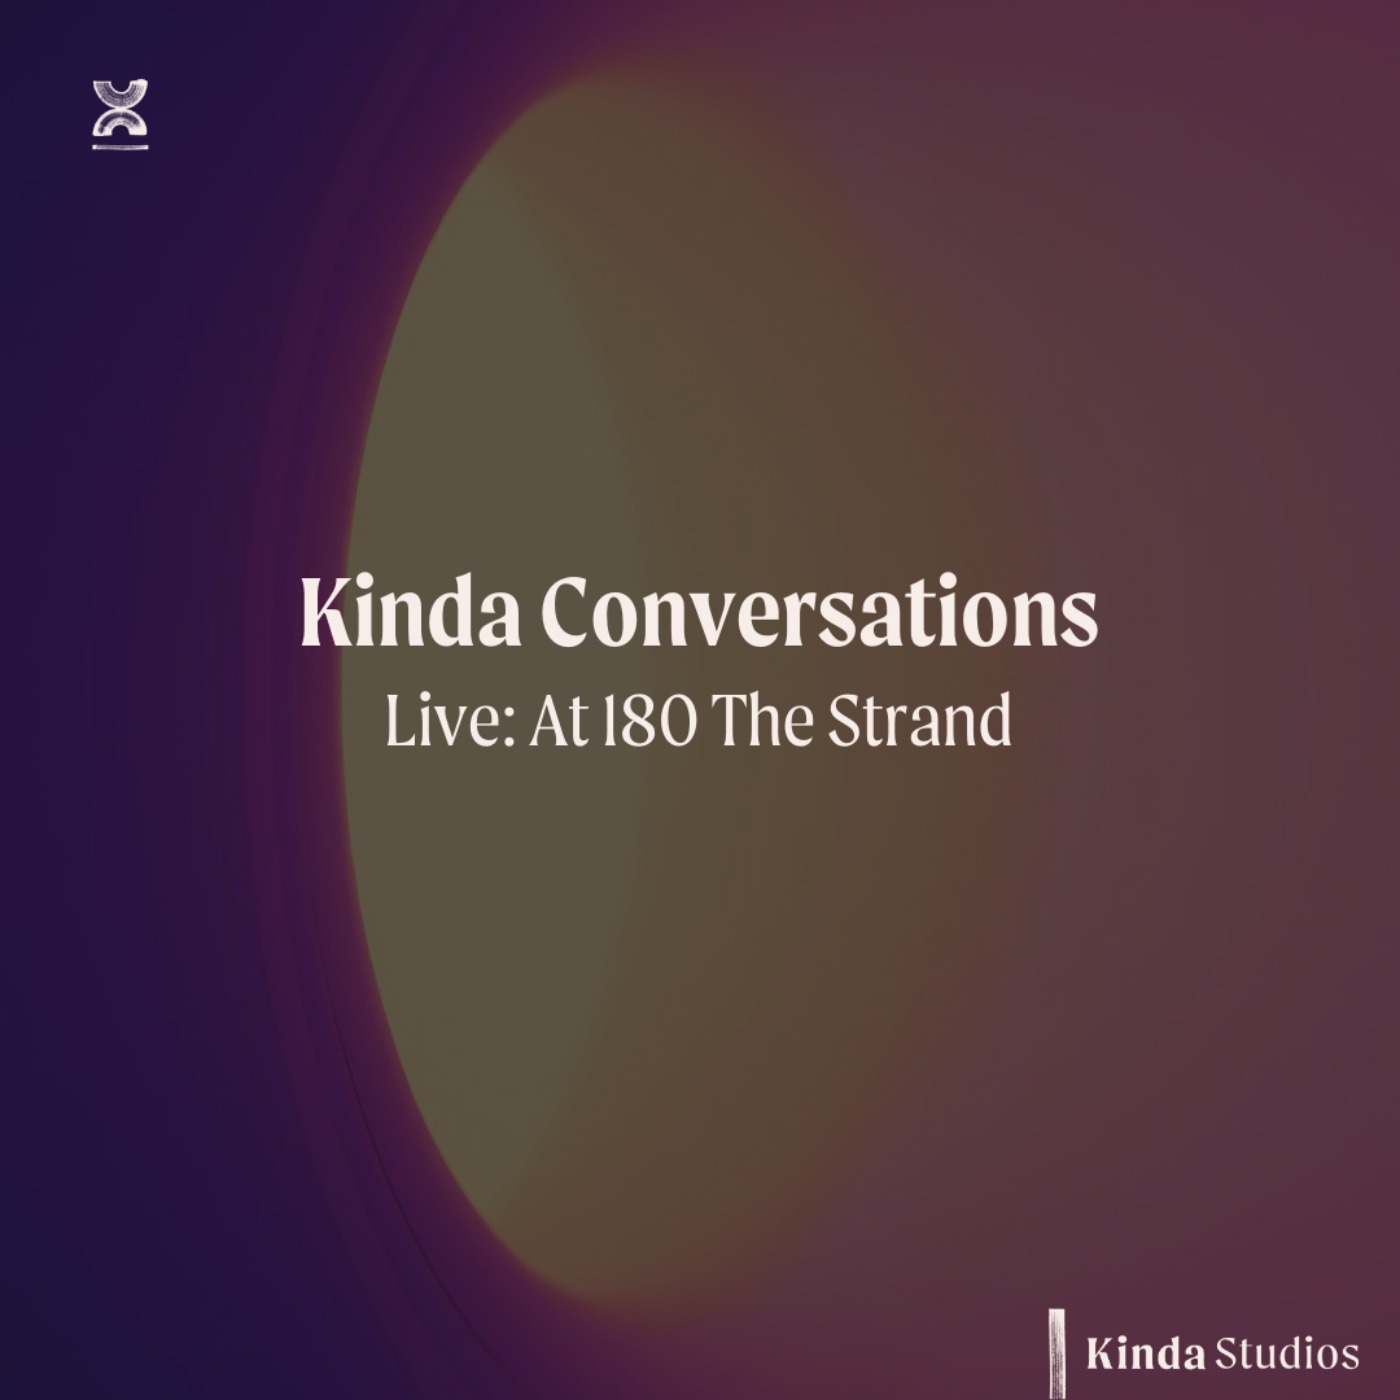 Kinda Conversations: Connection to Others